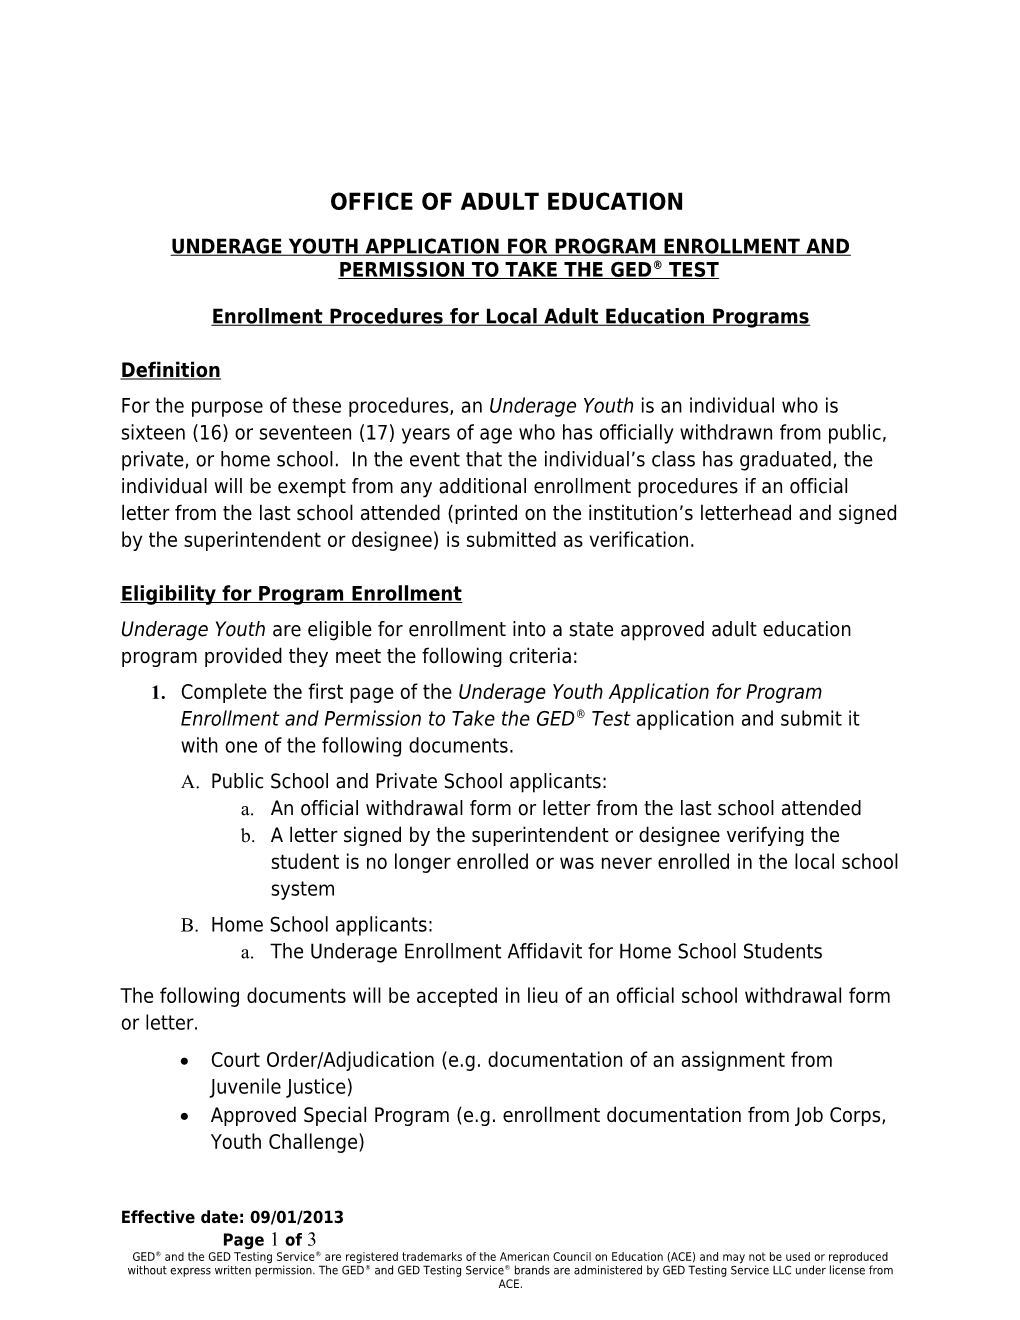 Underage Youth Application for Program Enrollmentand Permission to Take the GED Test